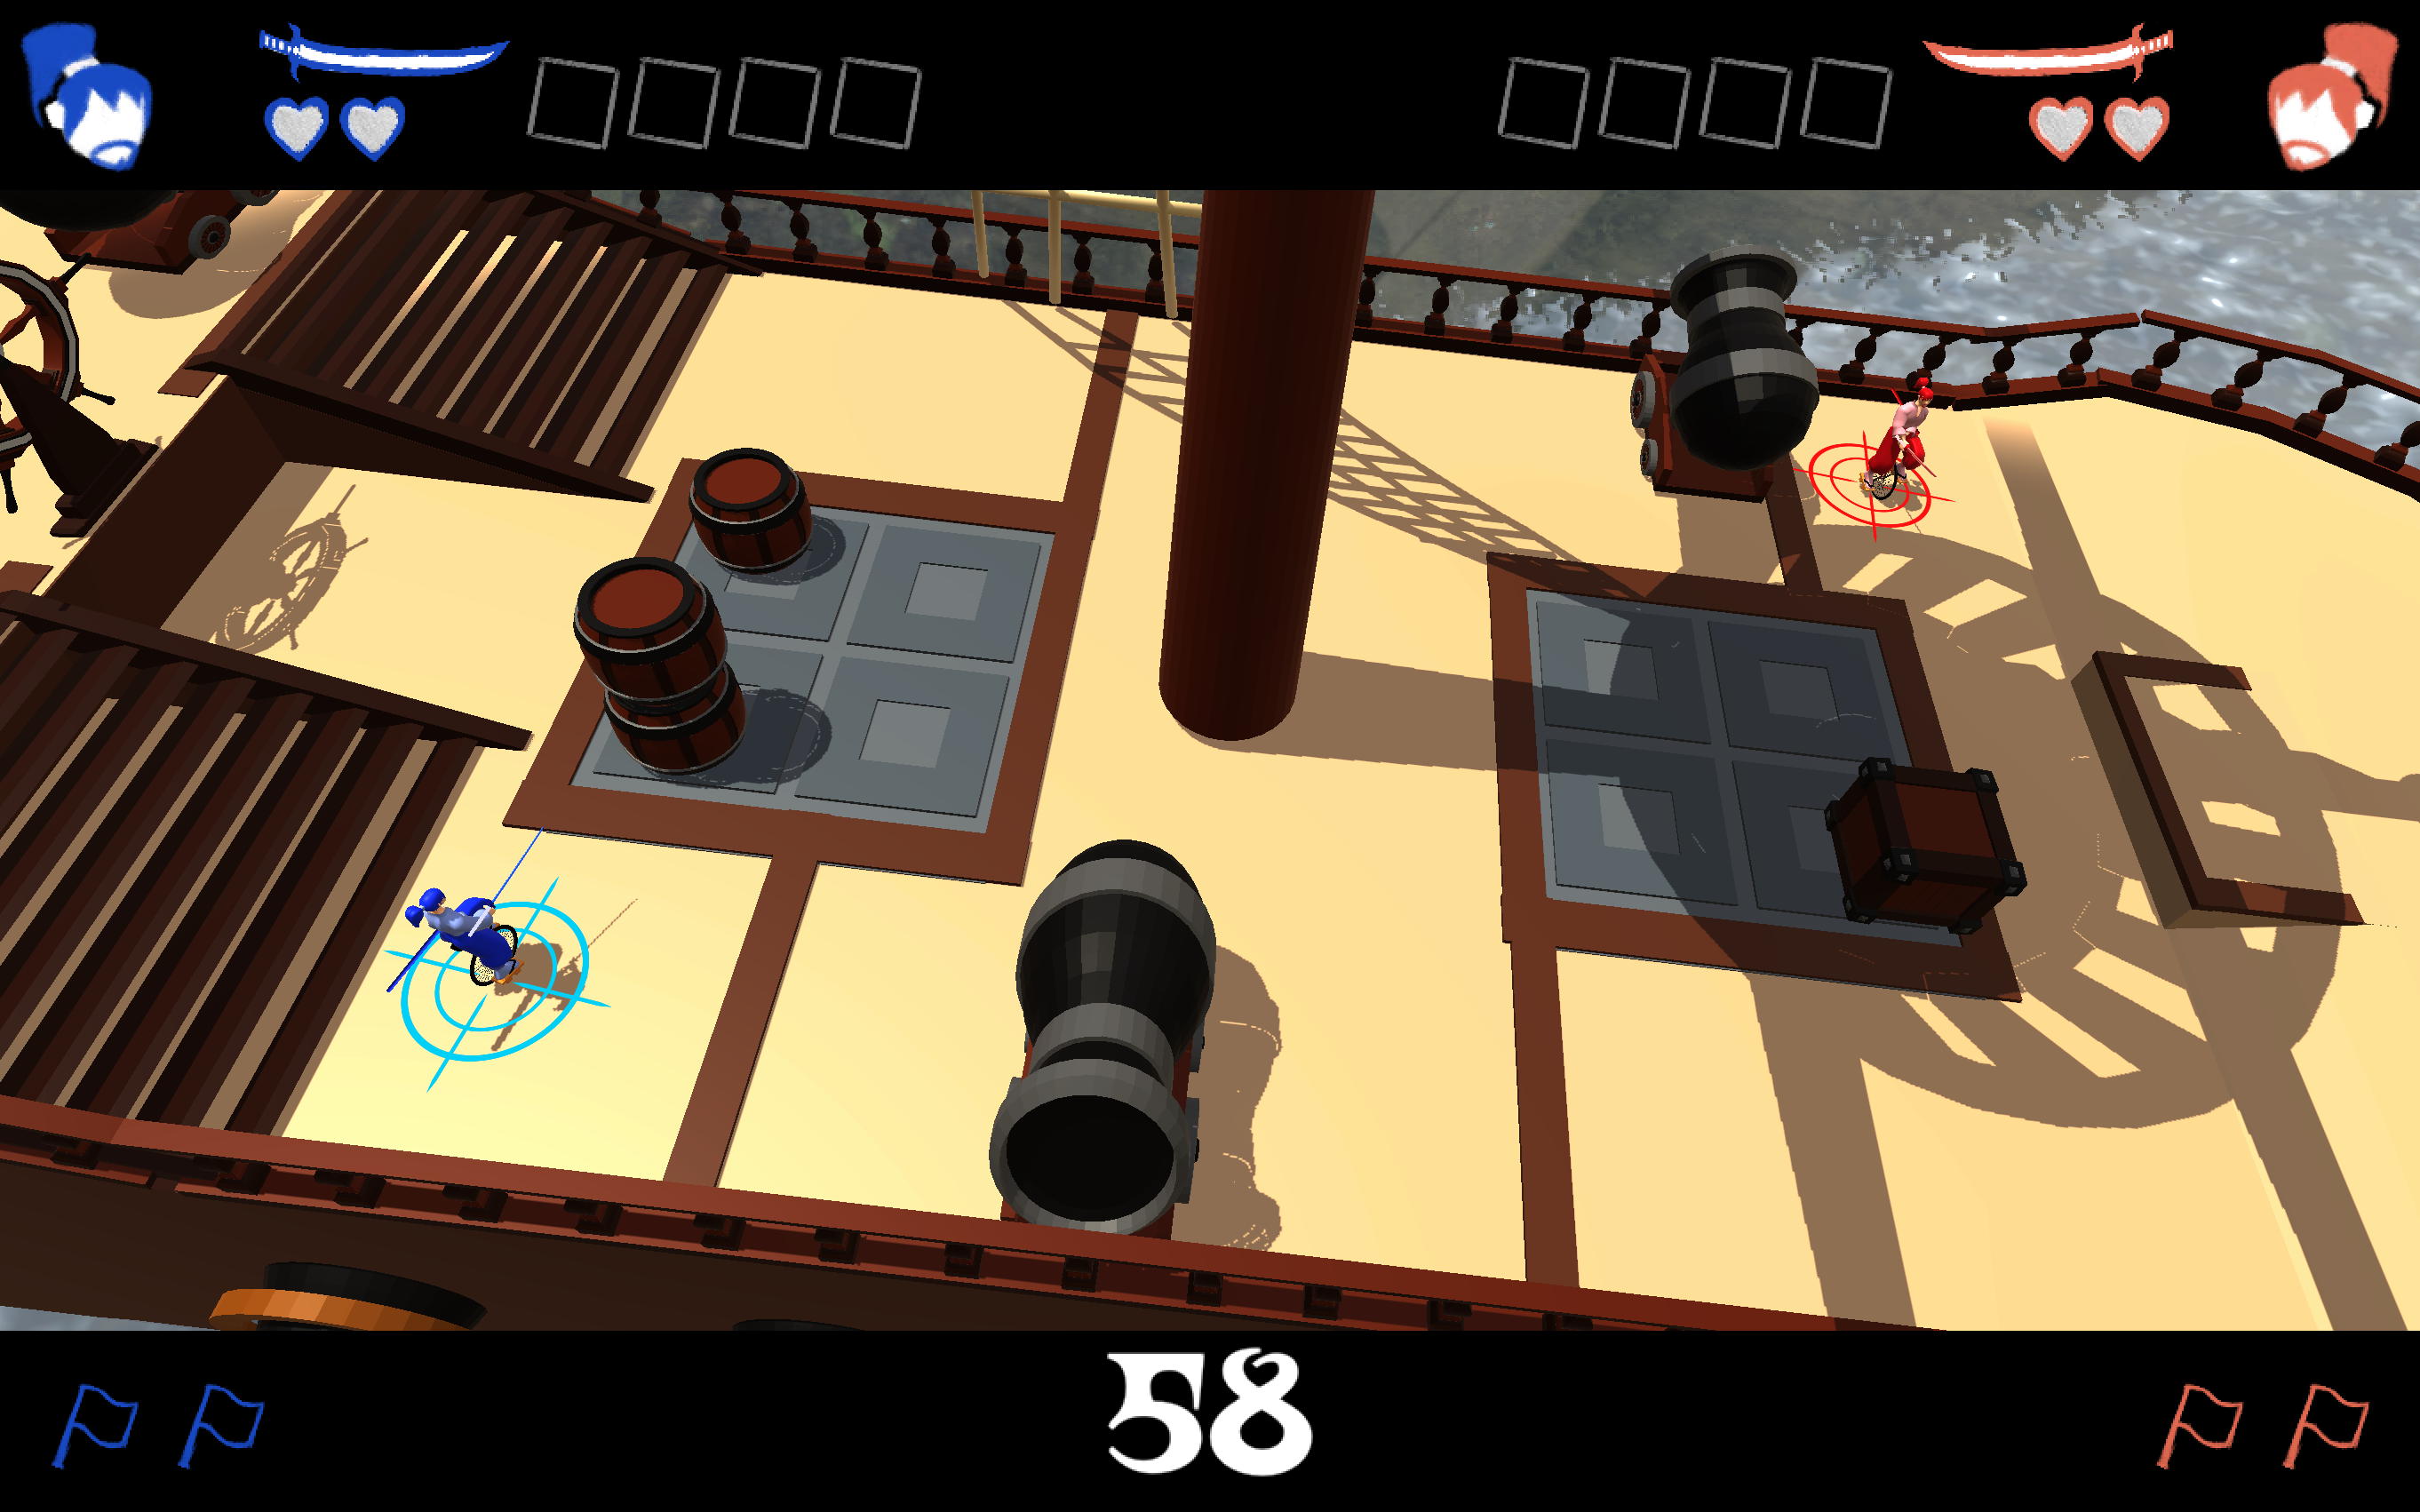 A view of the finished pirate ship level